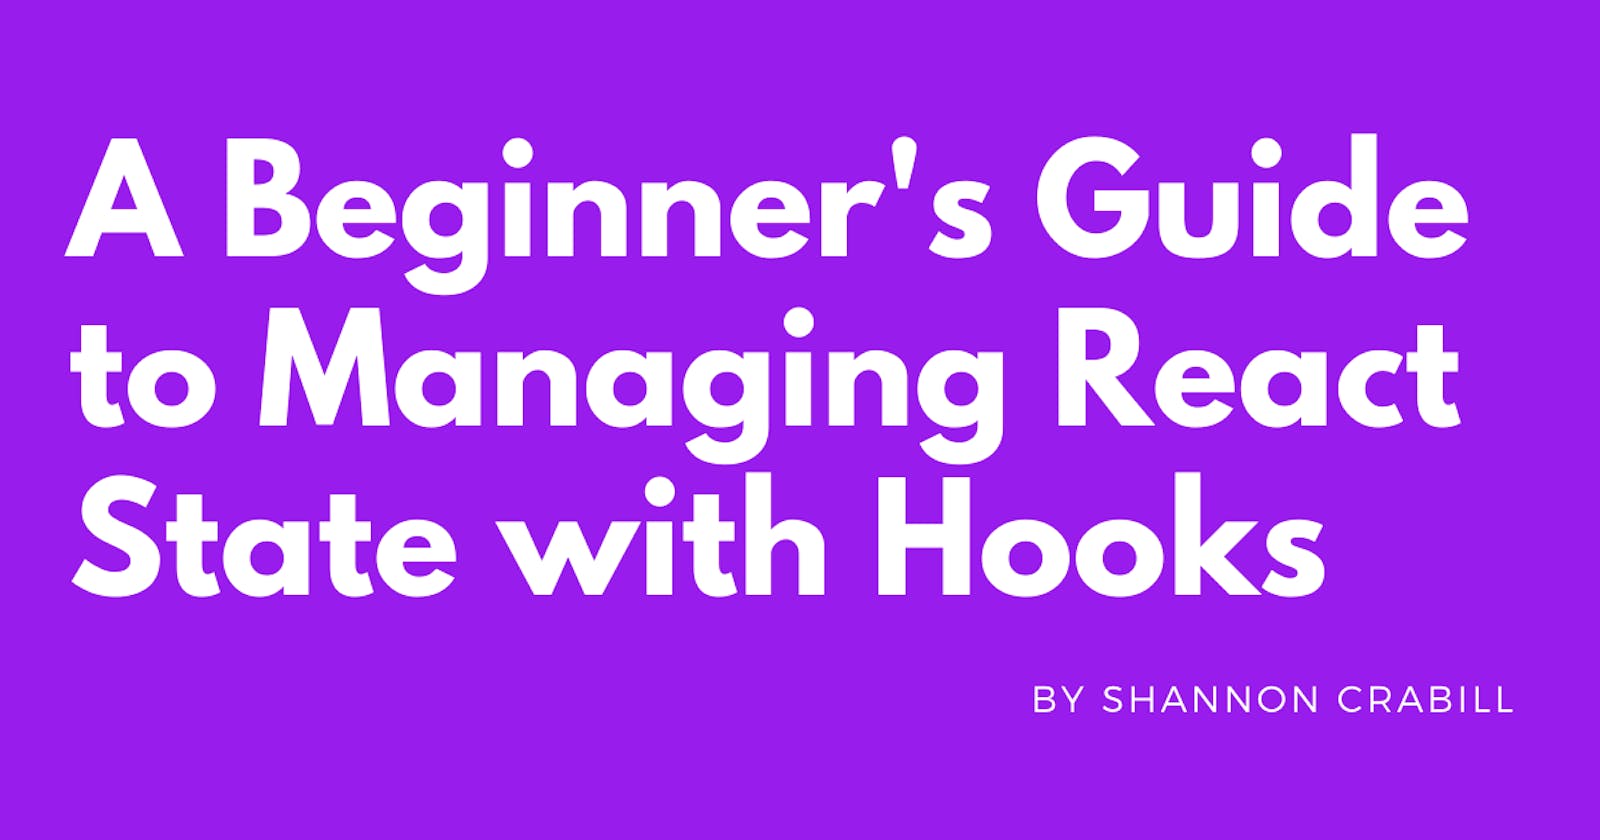 A Beginner's Guide to Managing React State with Hooks